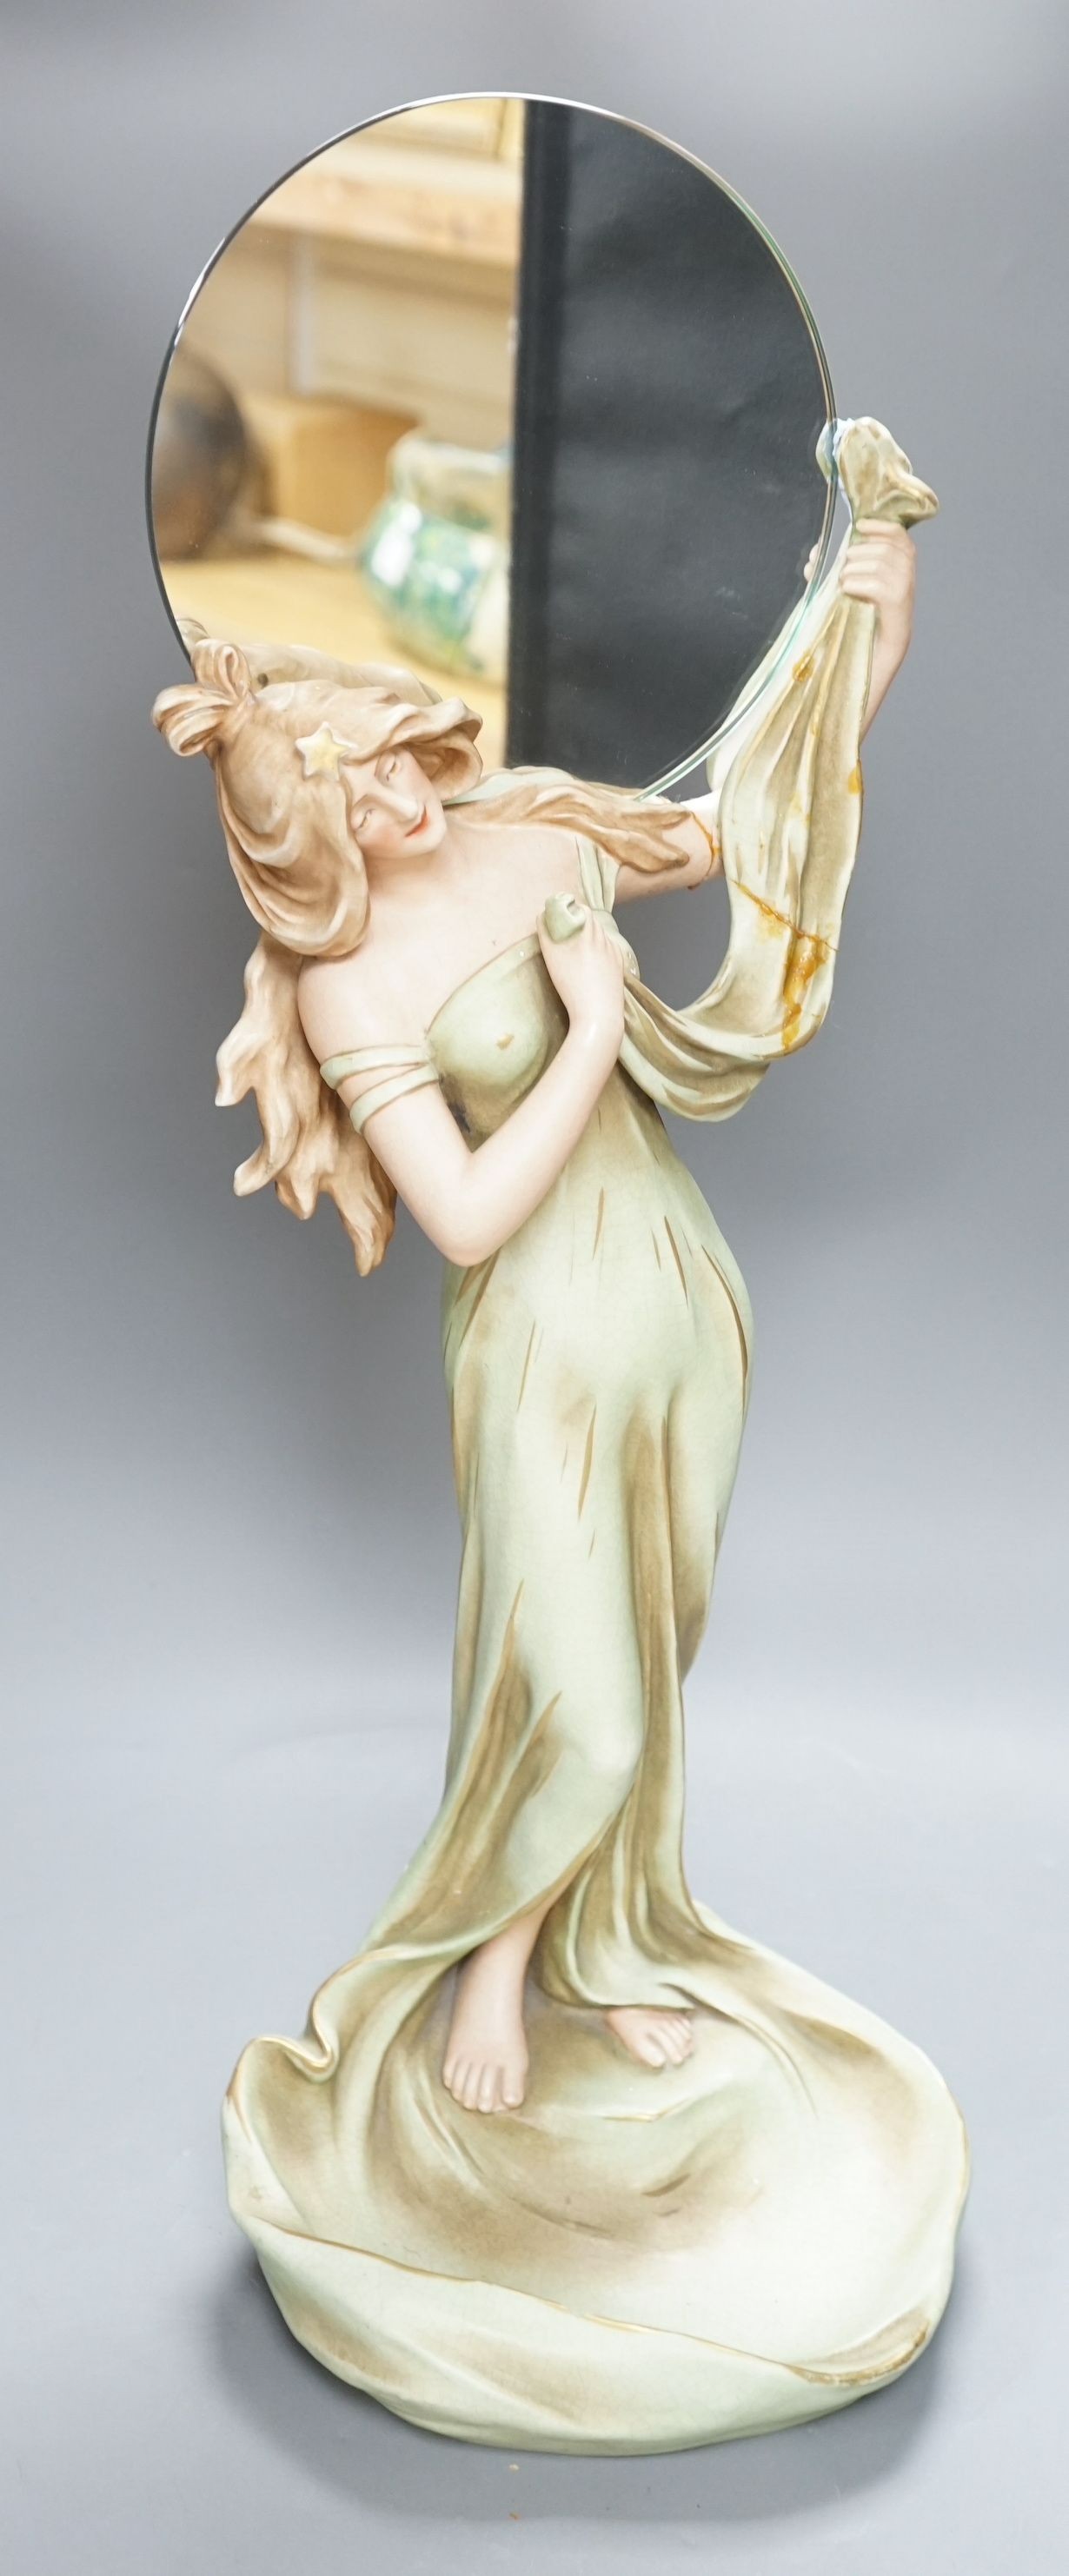 A continental Art Nouveau ceramic figure of a lady holding a mirror, 57cms high not including mirror                                                                                                                        